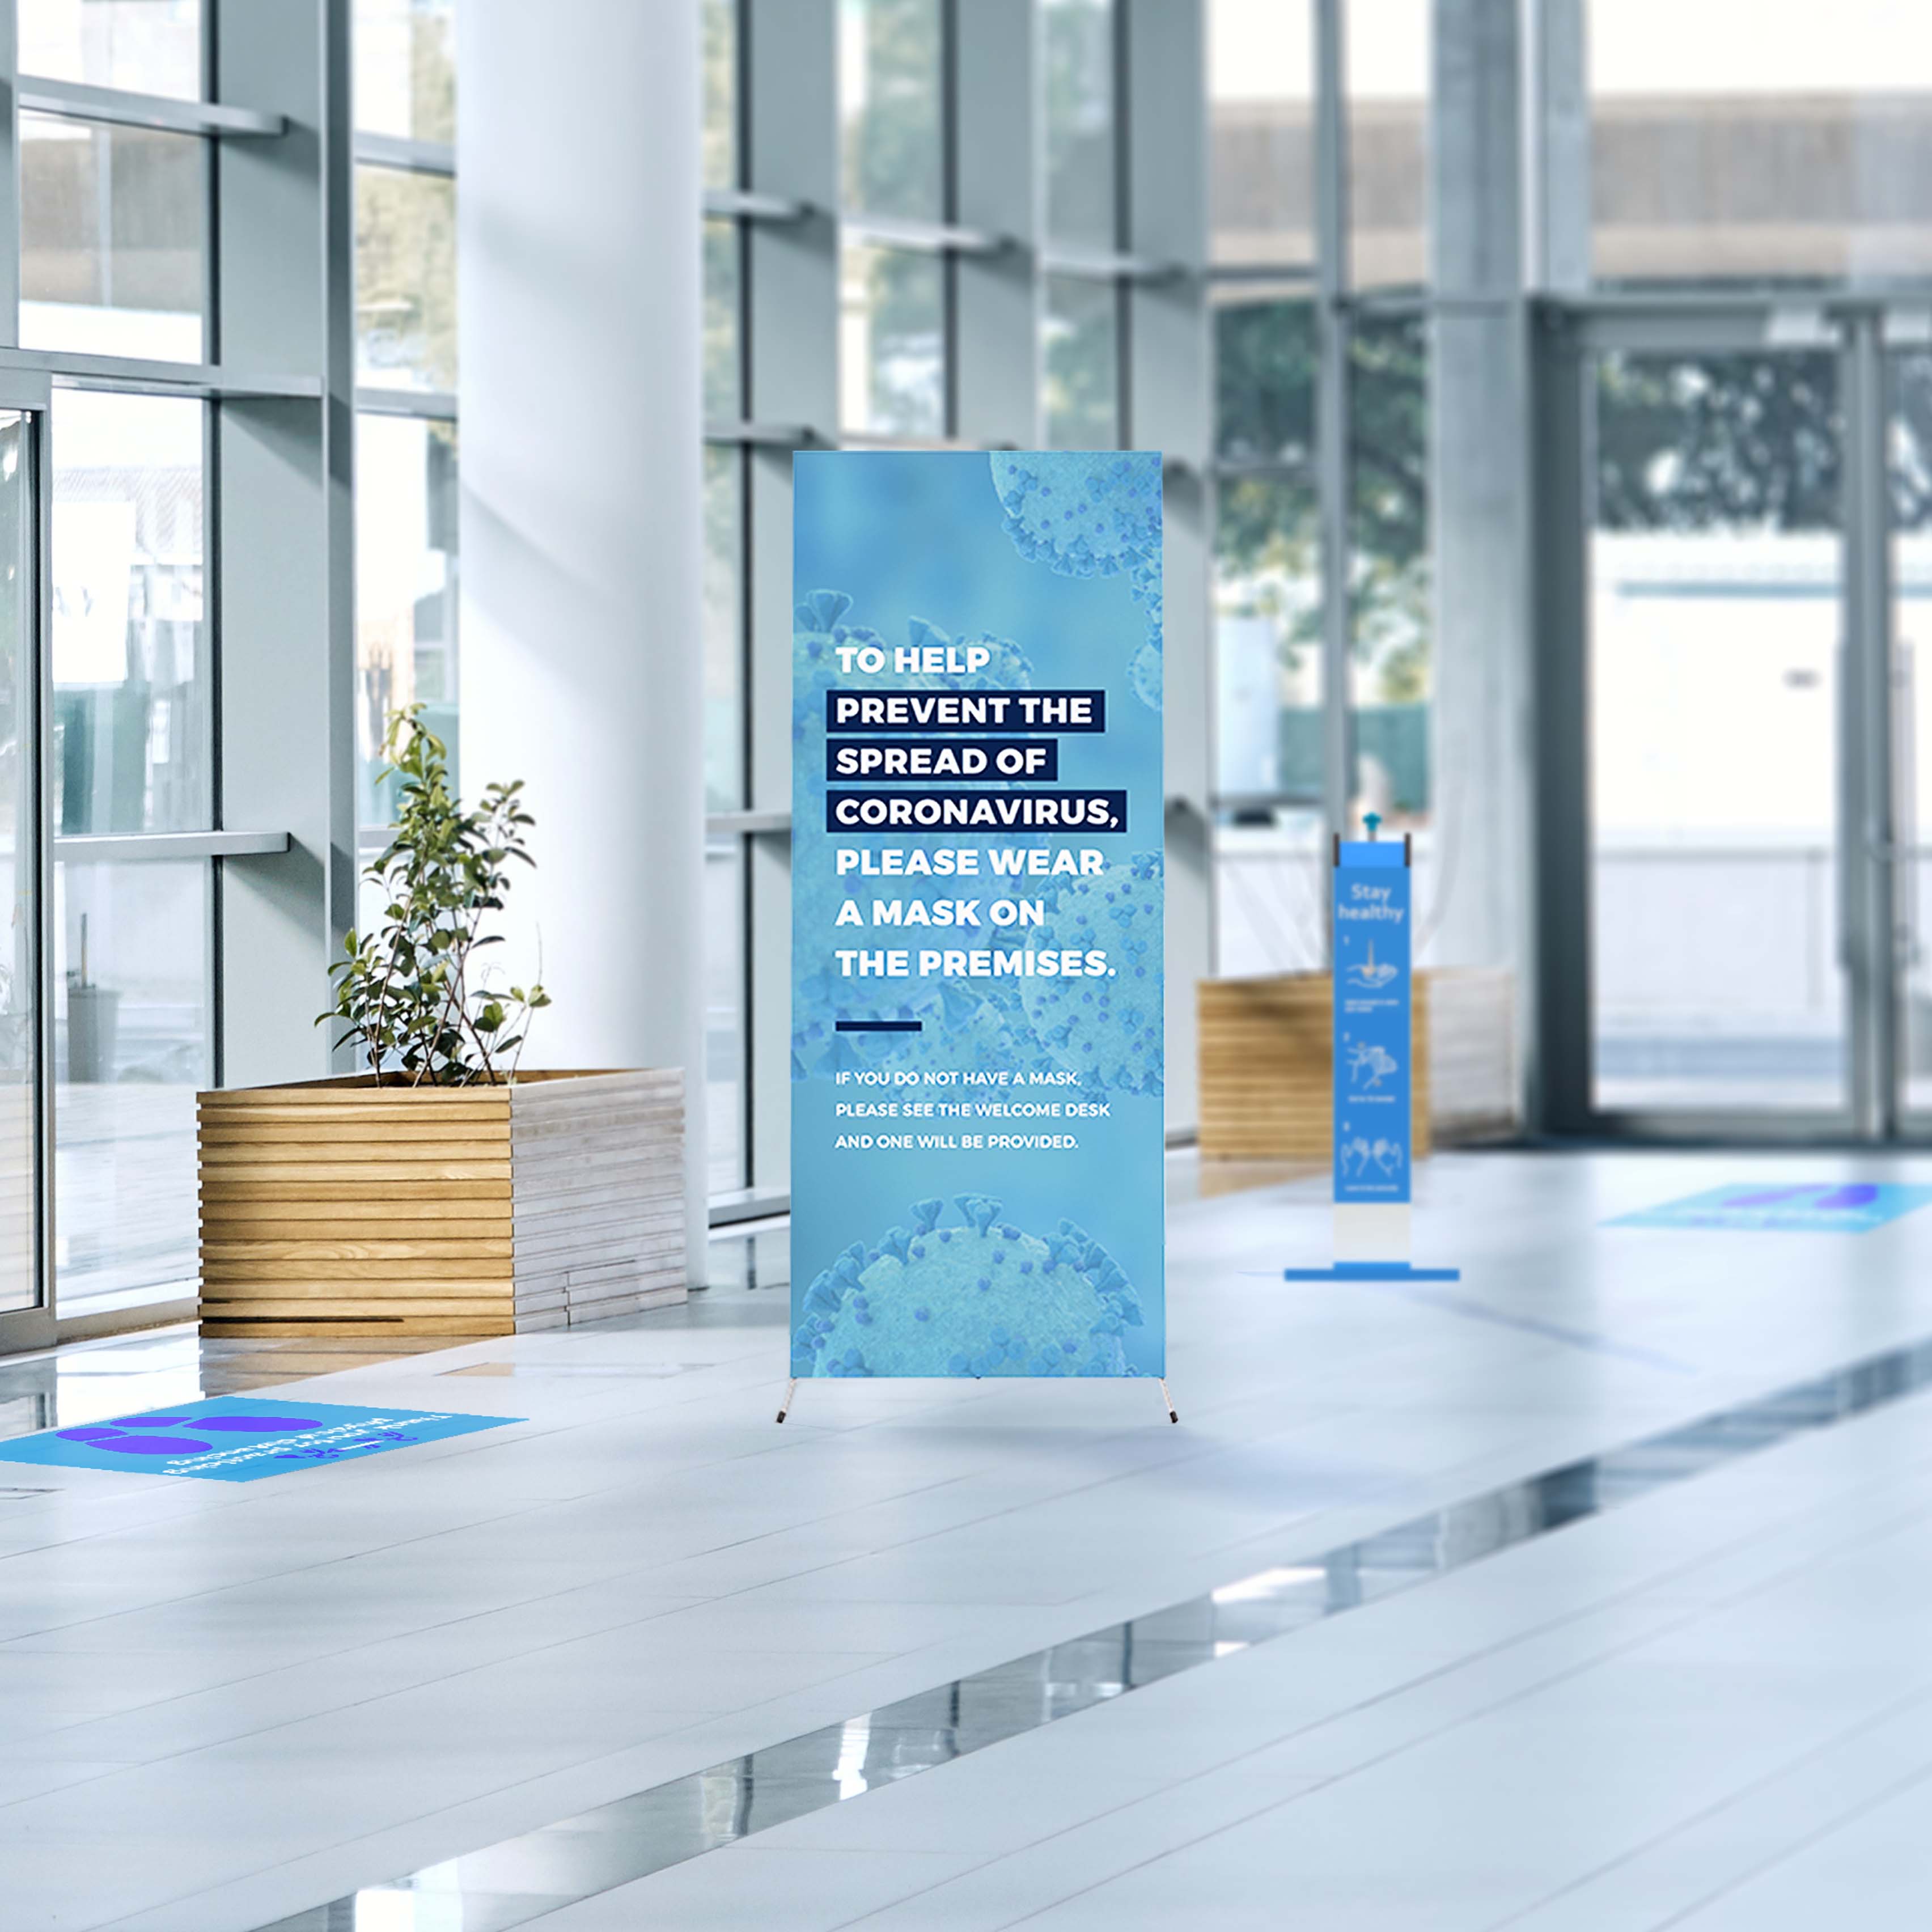 conference center lobby with sanitizer station, floor decal and window clings